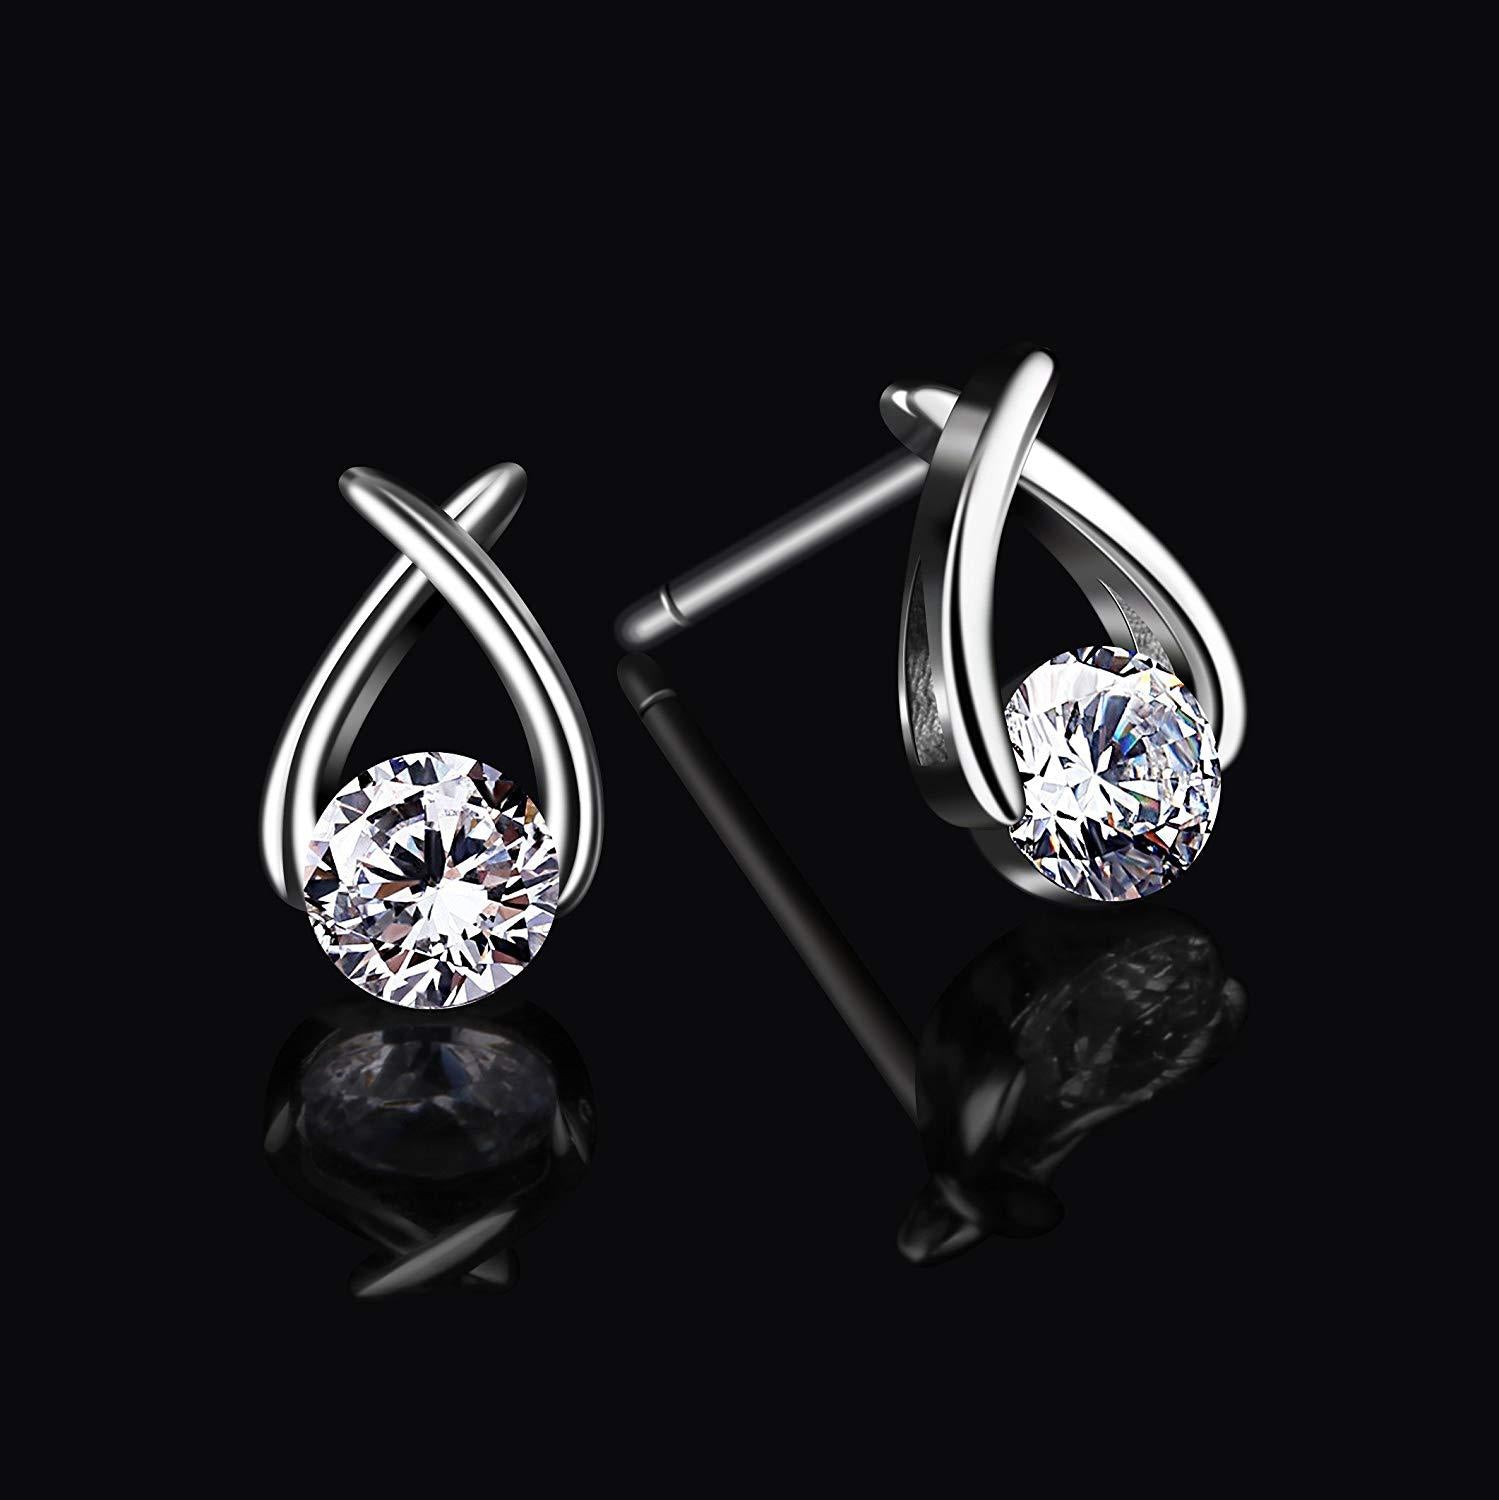 S925 Sterling Silver Creative Cross Budding Personality Wild Earrings Jewelry Cross-Border Exclusive